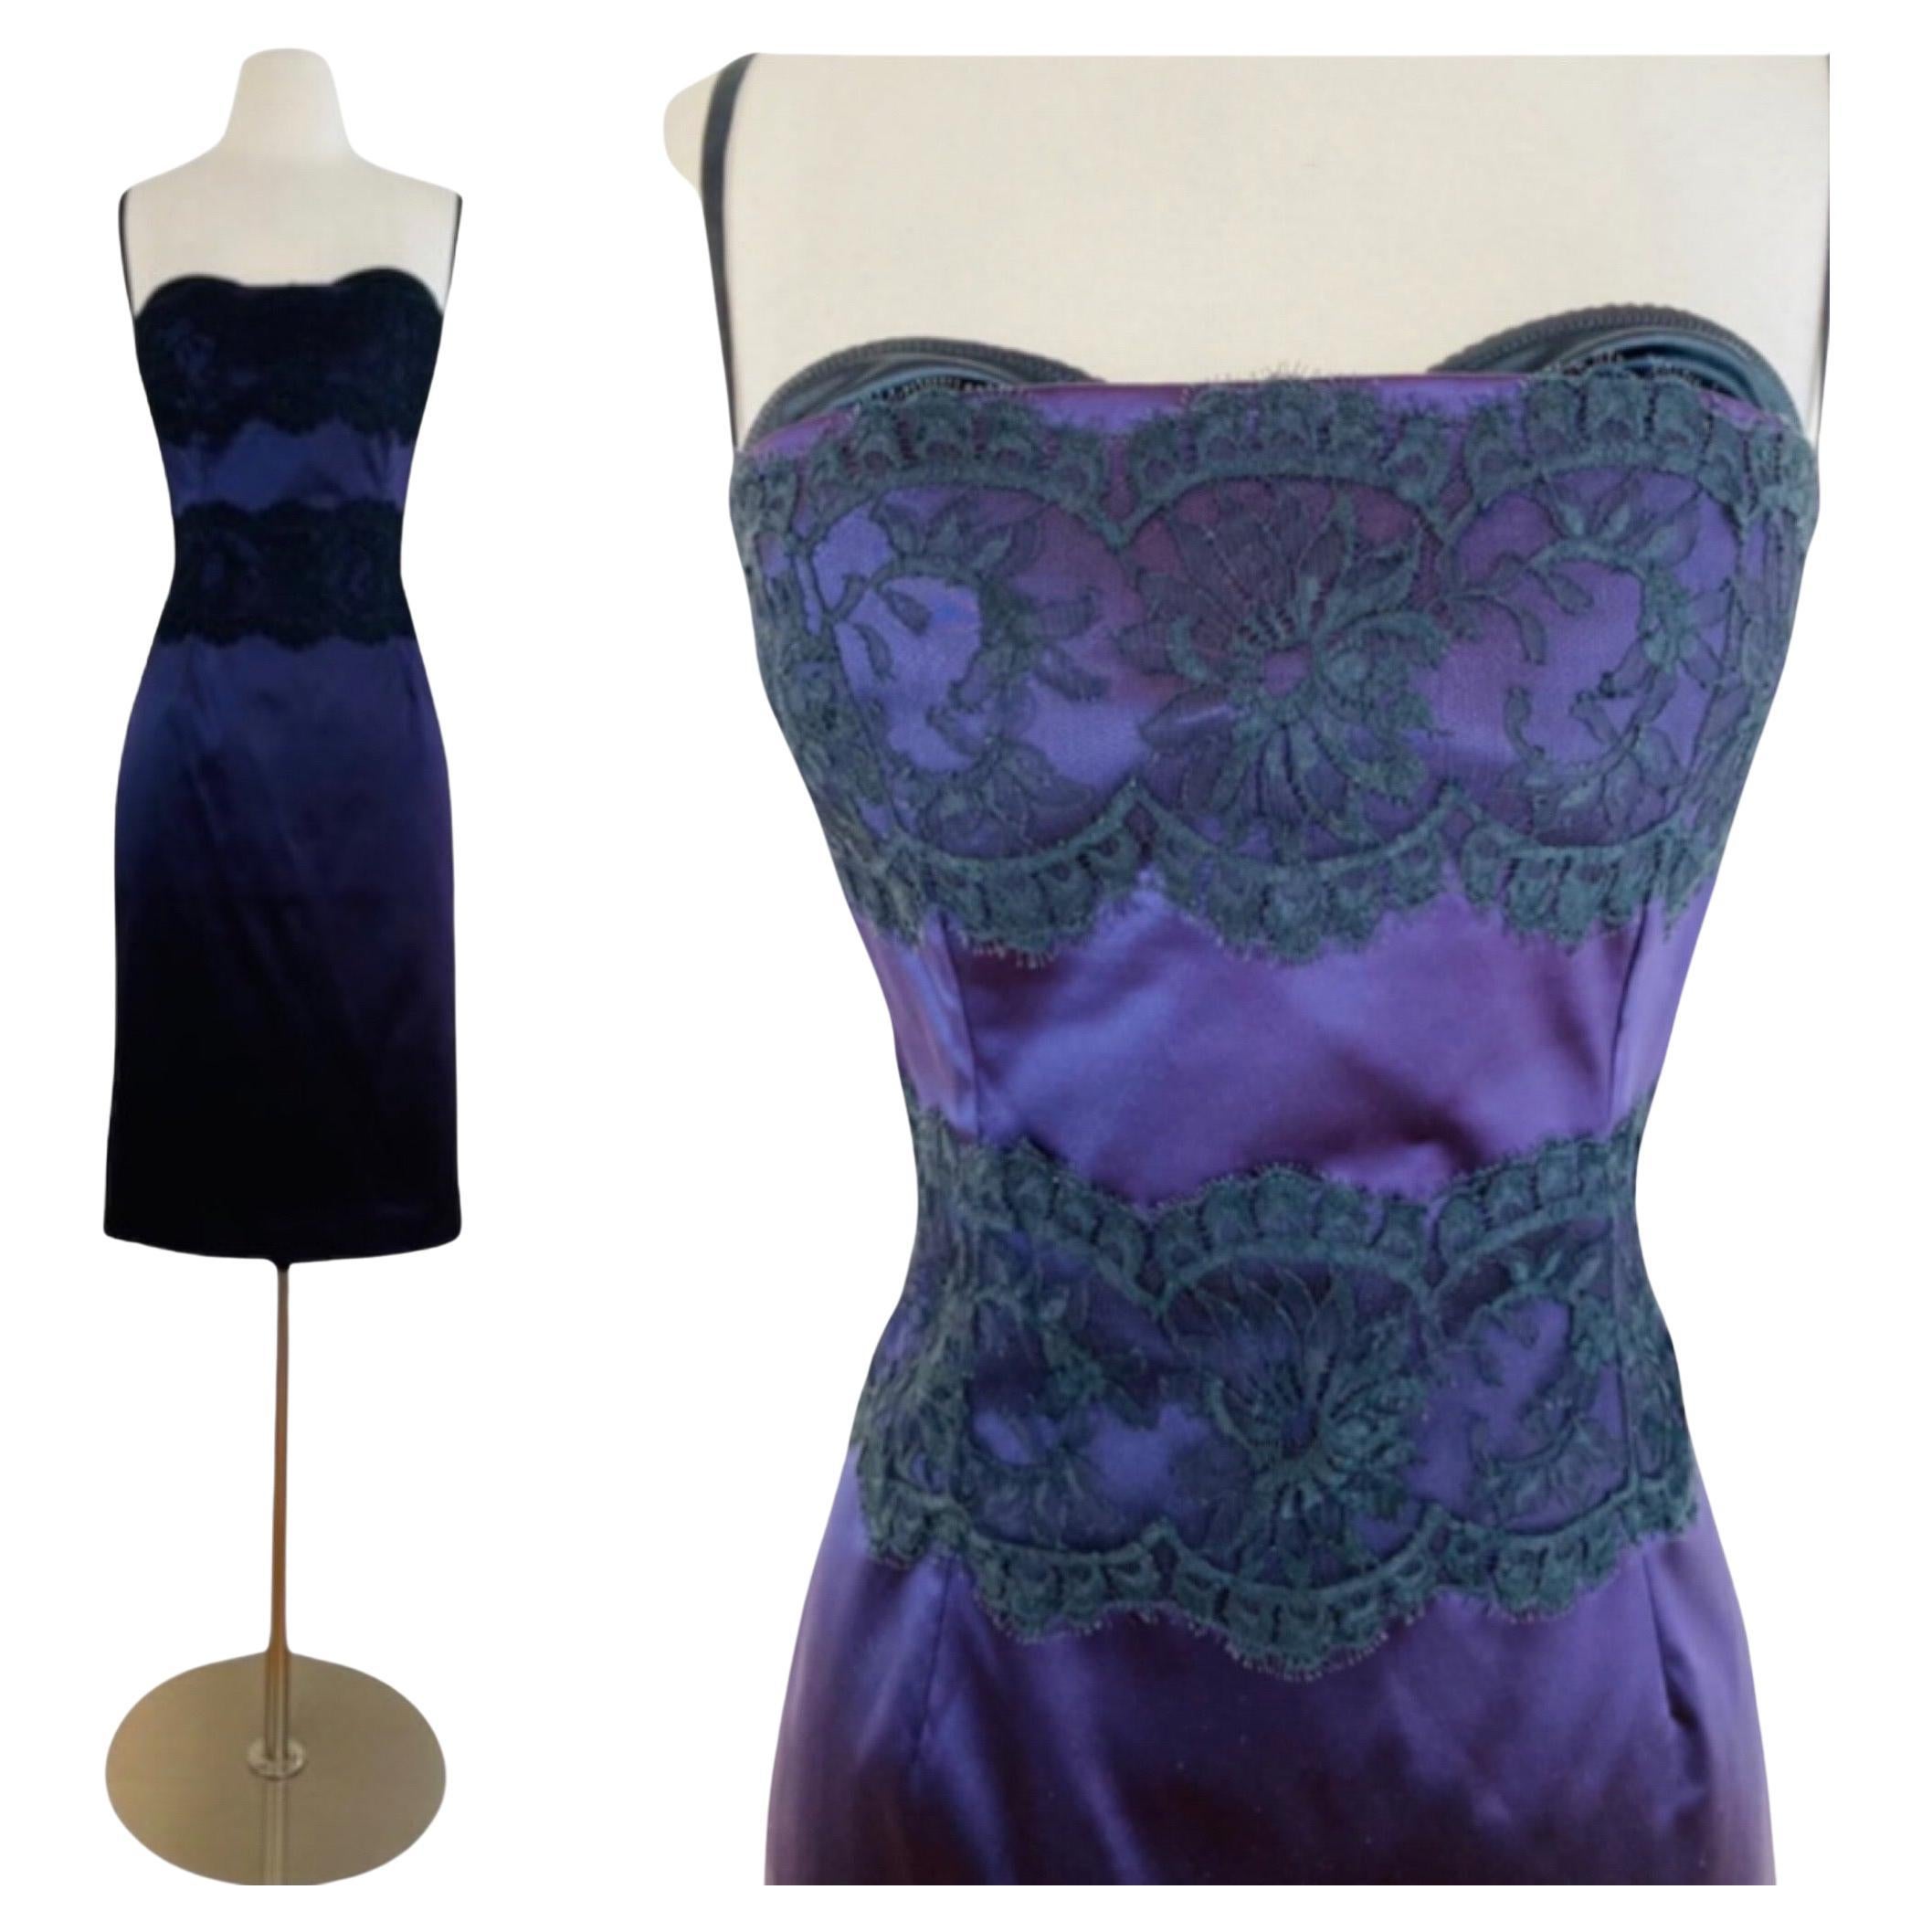 Beautiful  Dolce + Gabbana Dress
Deep purple silk + elastane fabric
Built in black bra with adjustable shoulder straps
Bodice cuts straight across with thick band of black eyelash lace accent
Fitted wiggle style
Wide band of black eyelash lace at